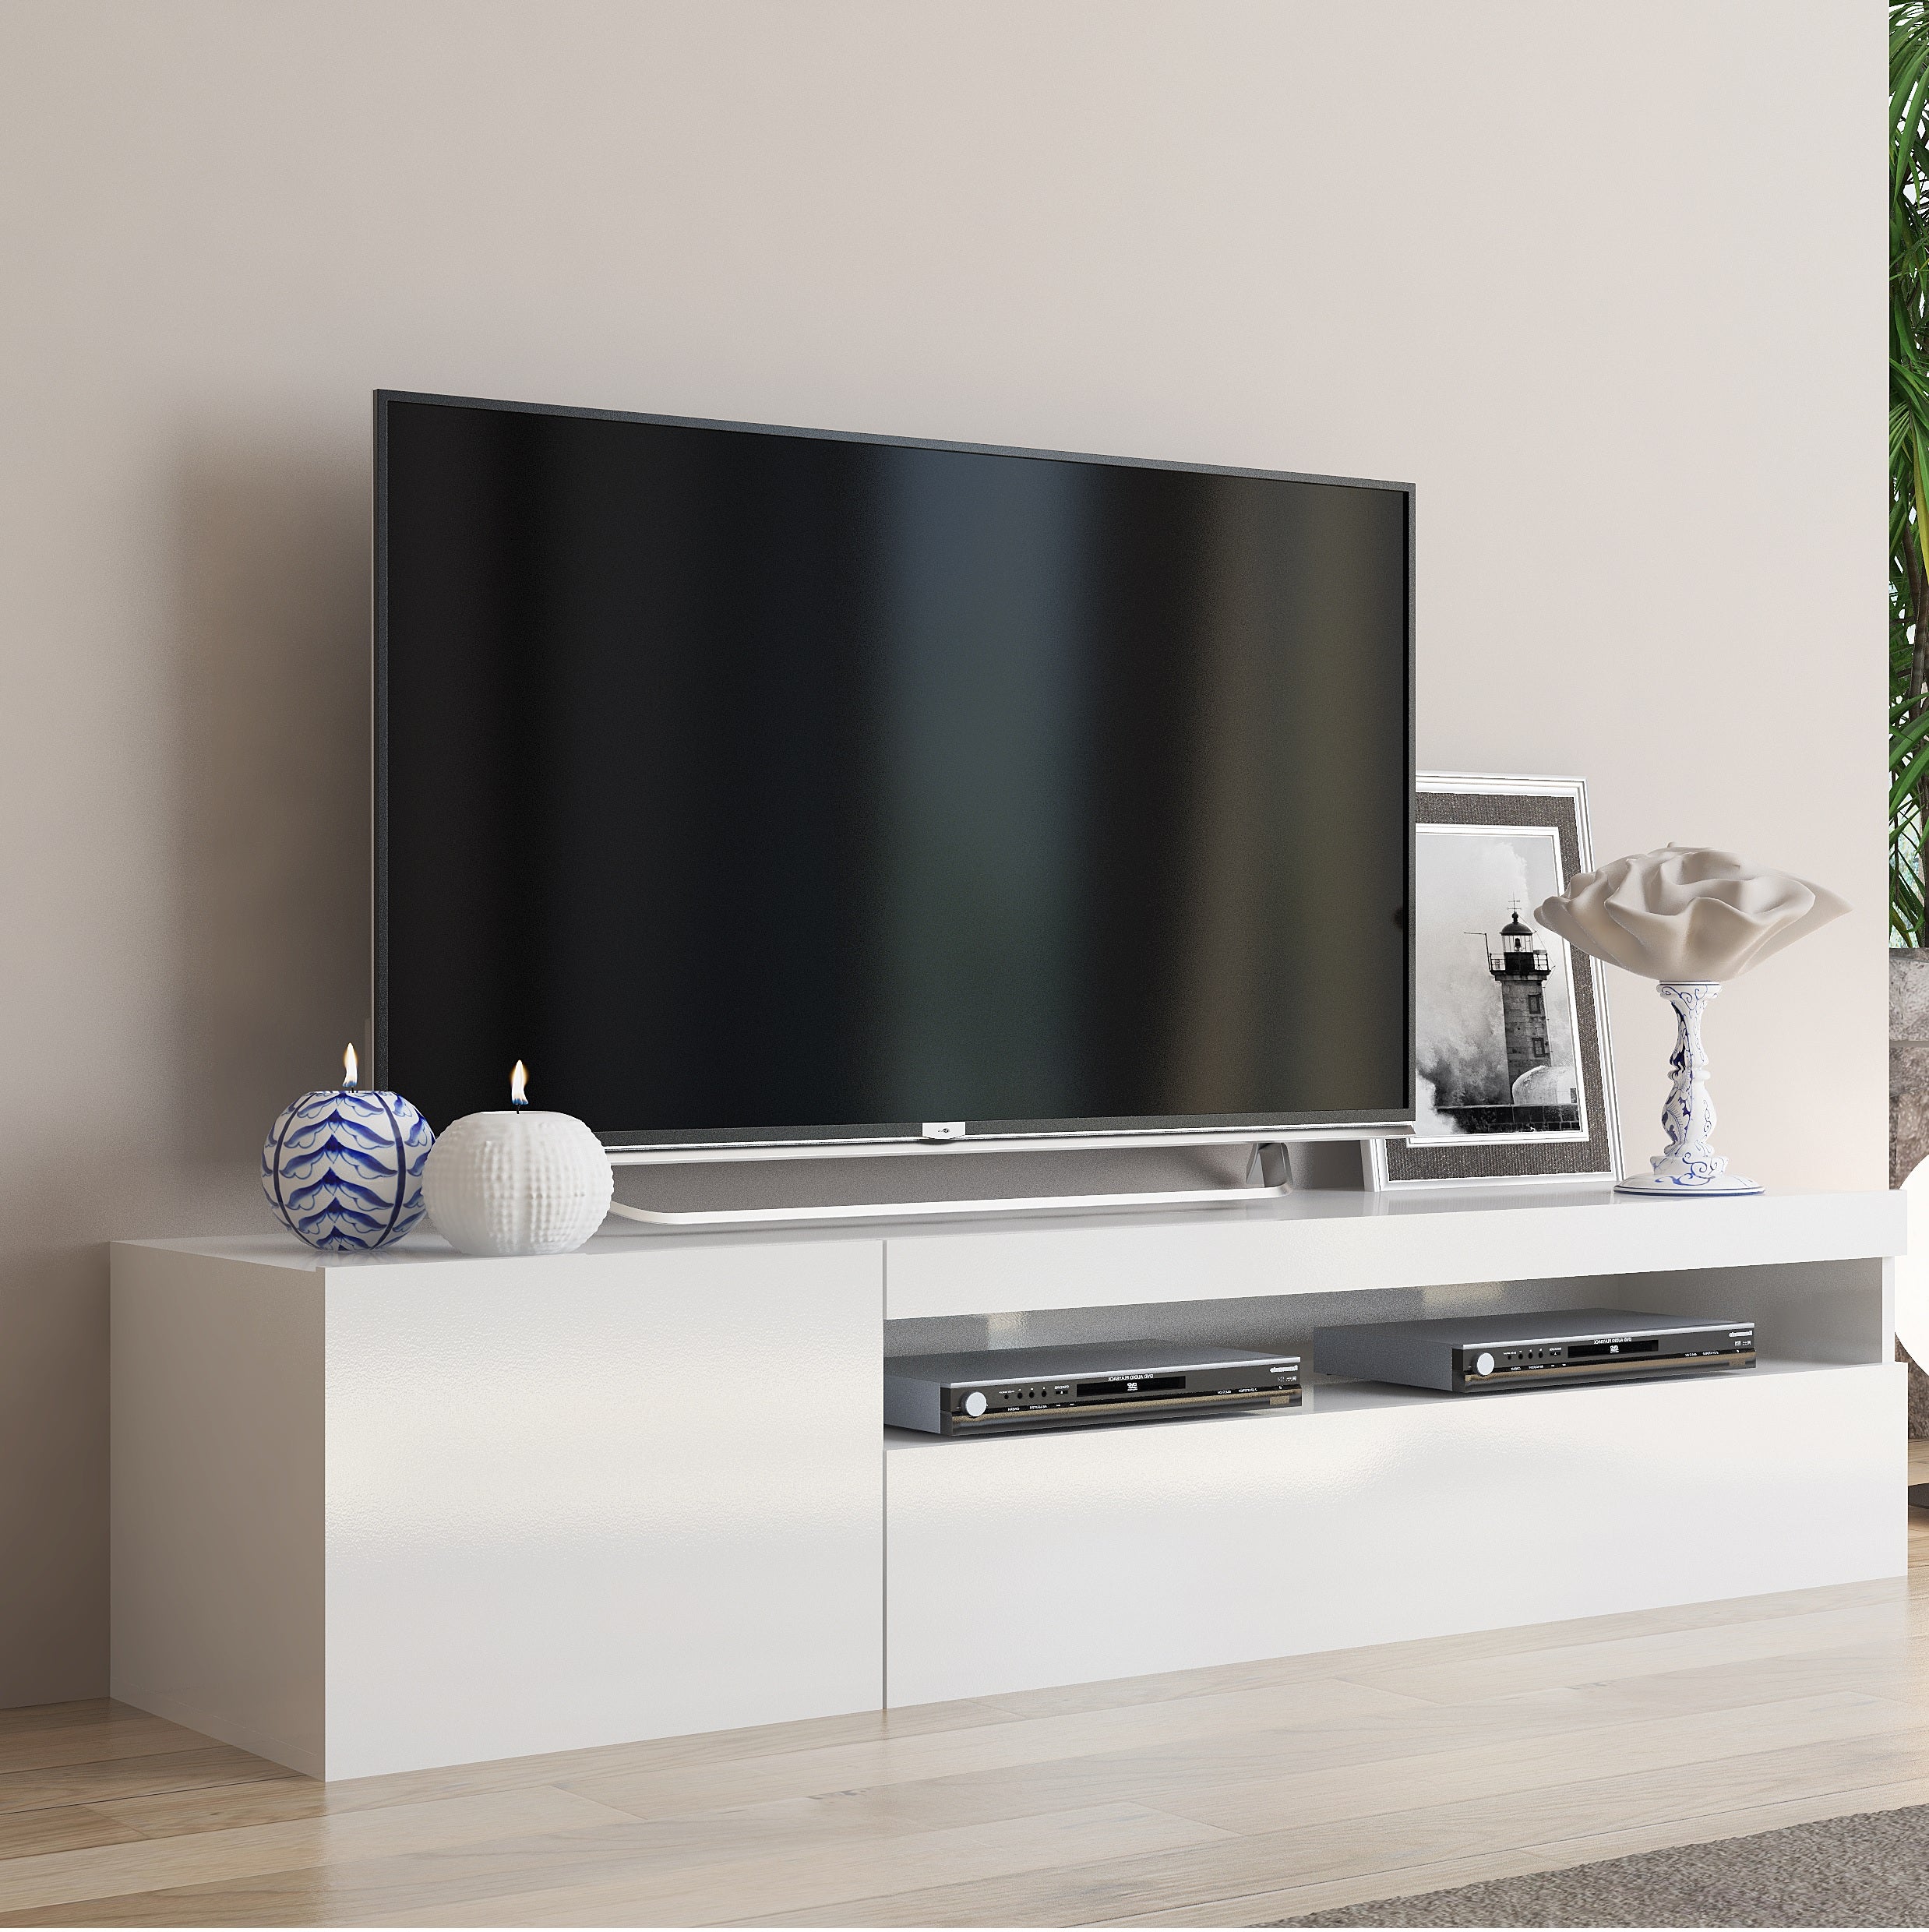 DAIQUIRI High Gloss TV Stand, for TVs up to 60" - Furniture.Agency